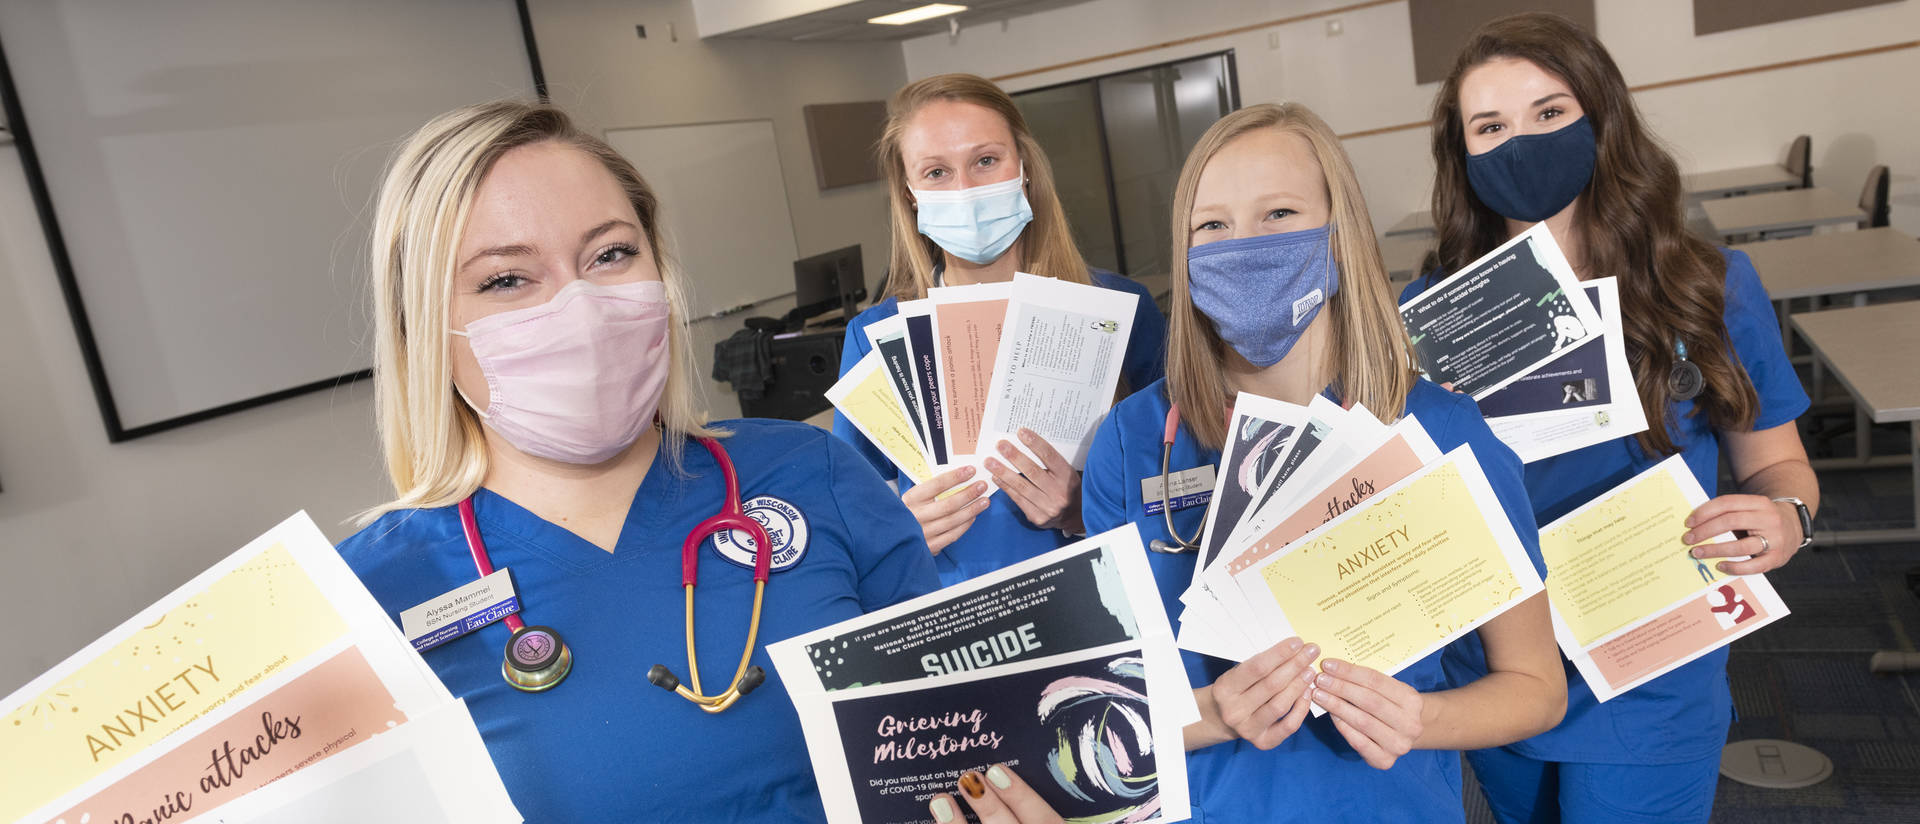 A project launched this spring by a team of UW-Eau Claire nursing students is helping to get information about mental health disorders and mental health resources into the hands of young people across the state.